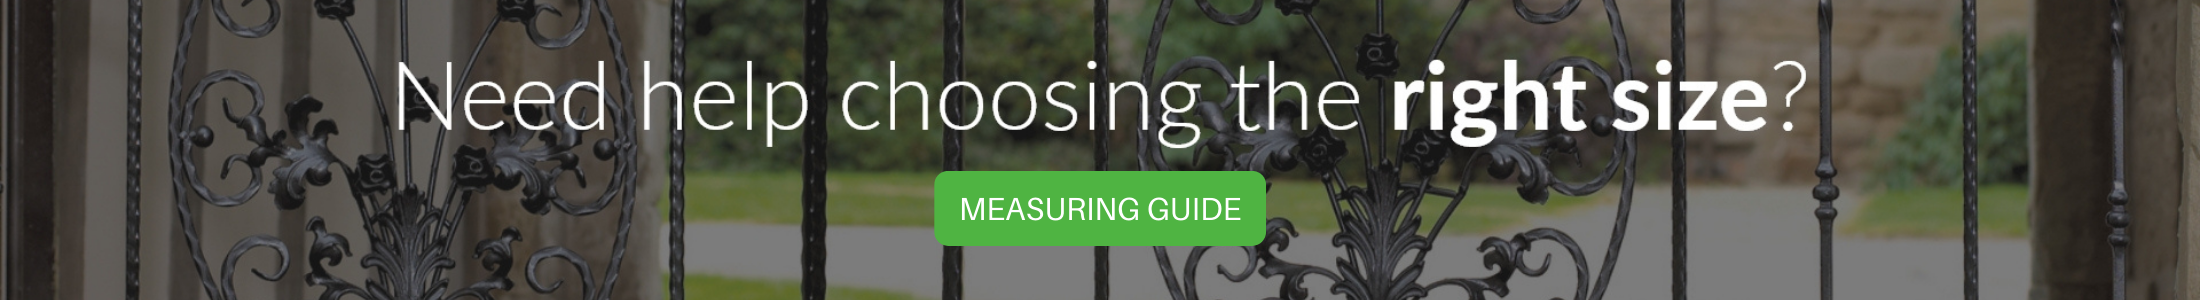 Read the full measuring guide here